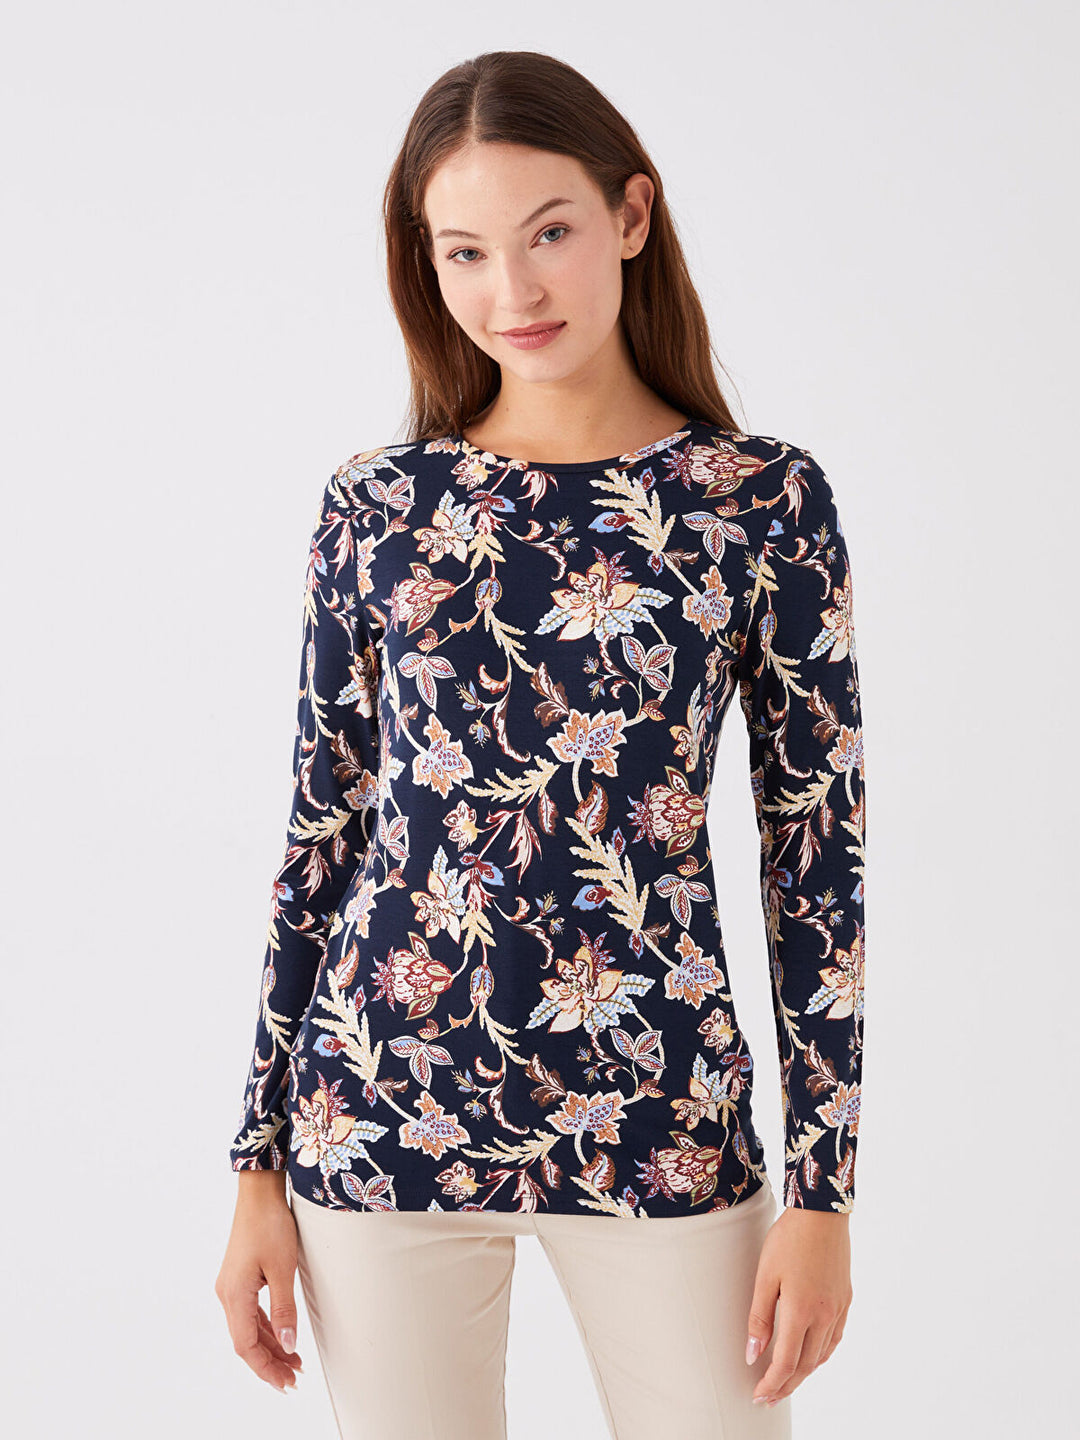 LCWAIKIKI Classic Crew Neck Floral Long Sleeve Women's Blouse